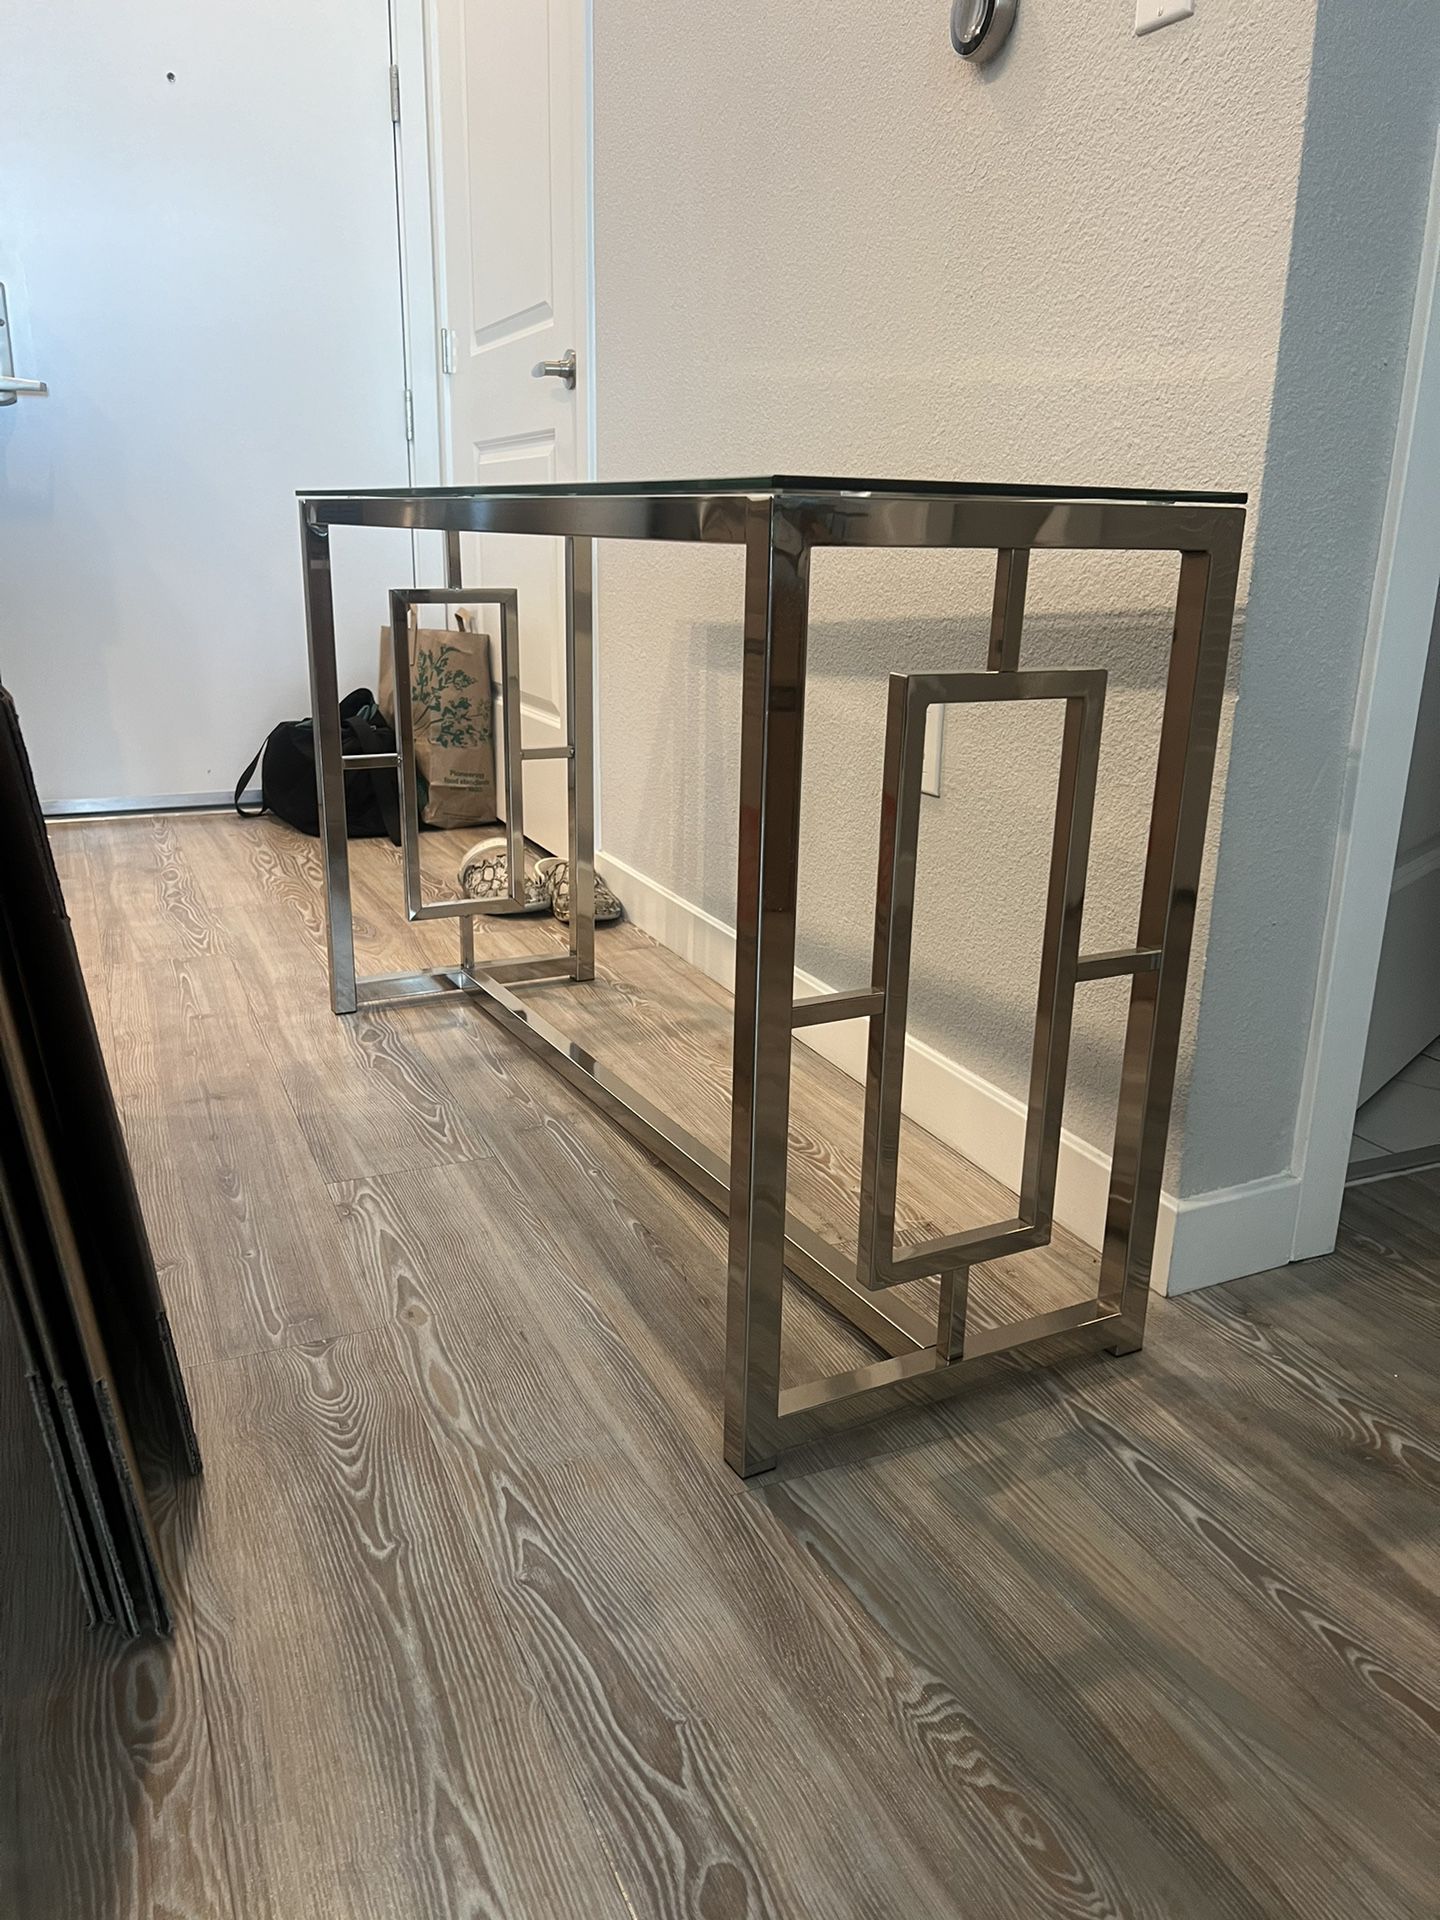 Glass console table 